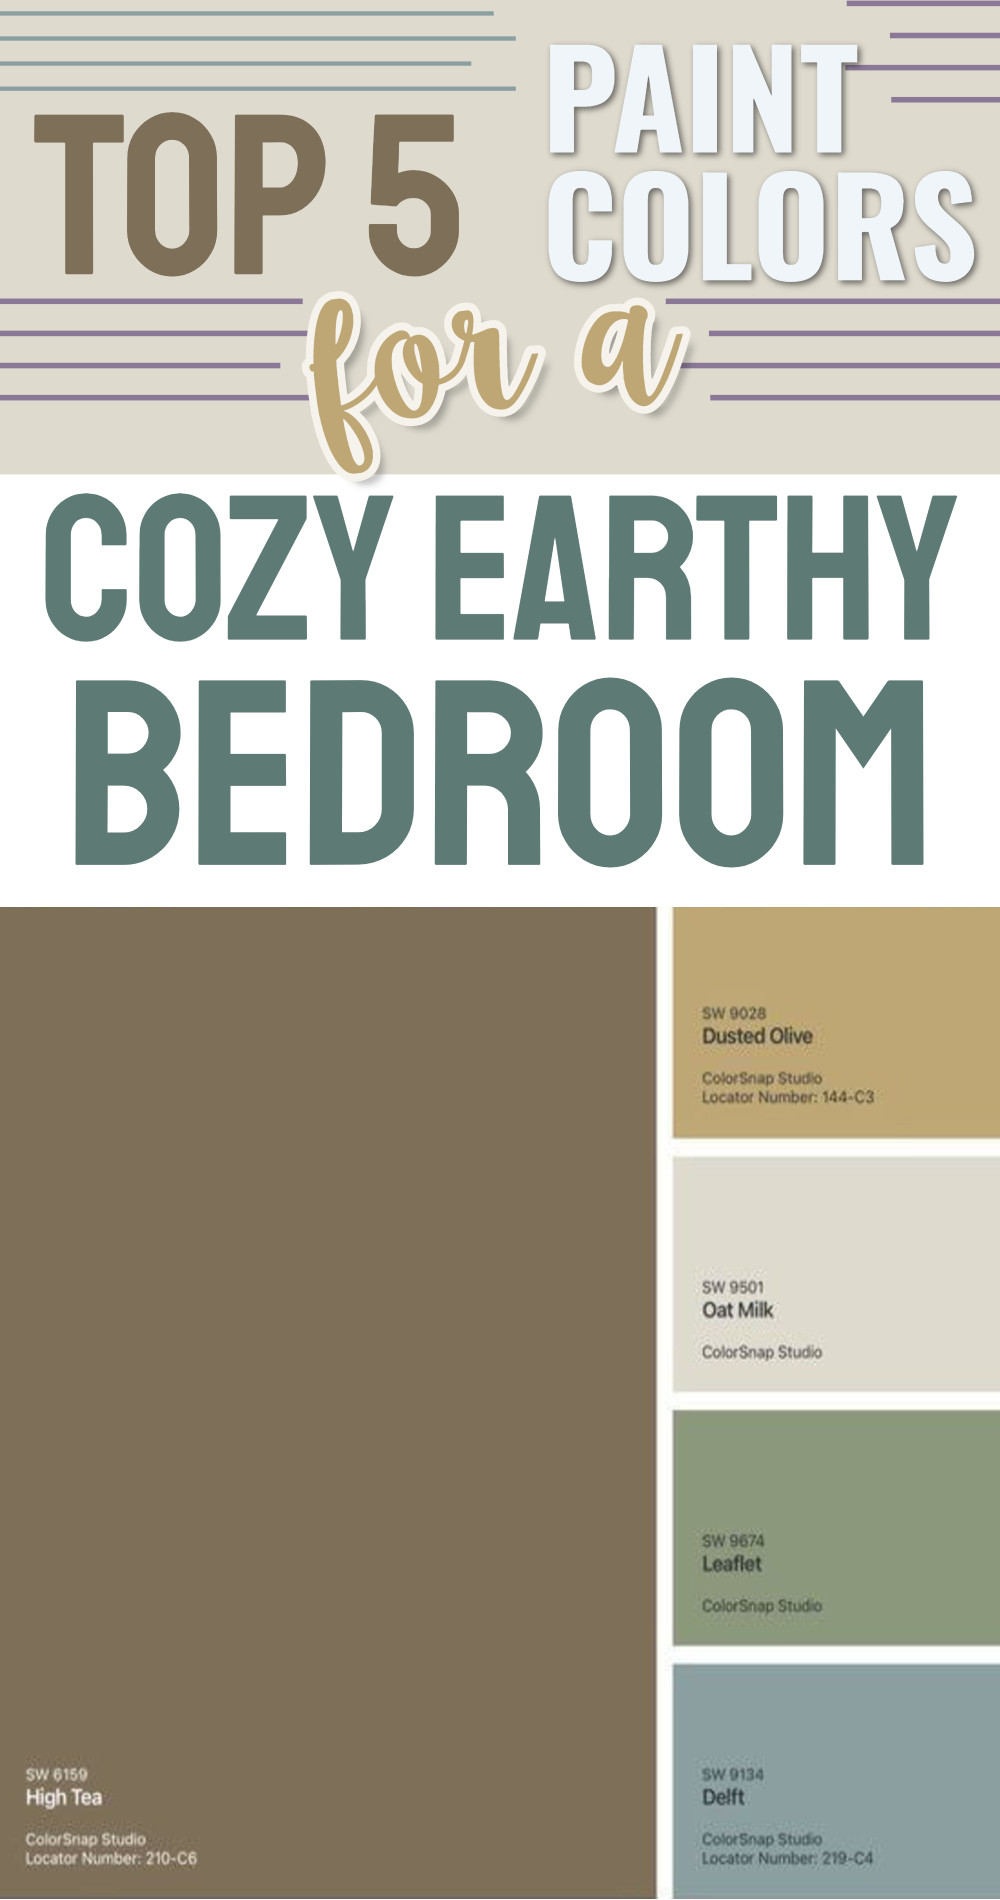 Top 5 Paint Colors for a Cozy Earthy Bedroom